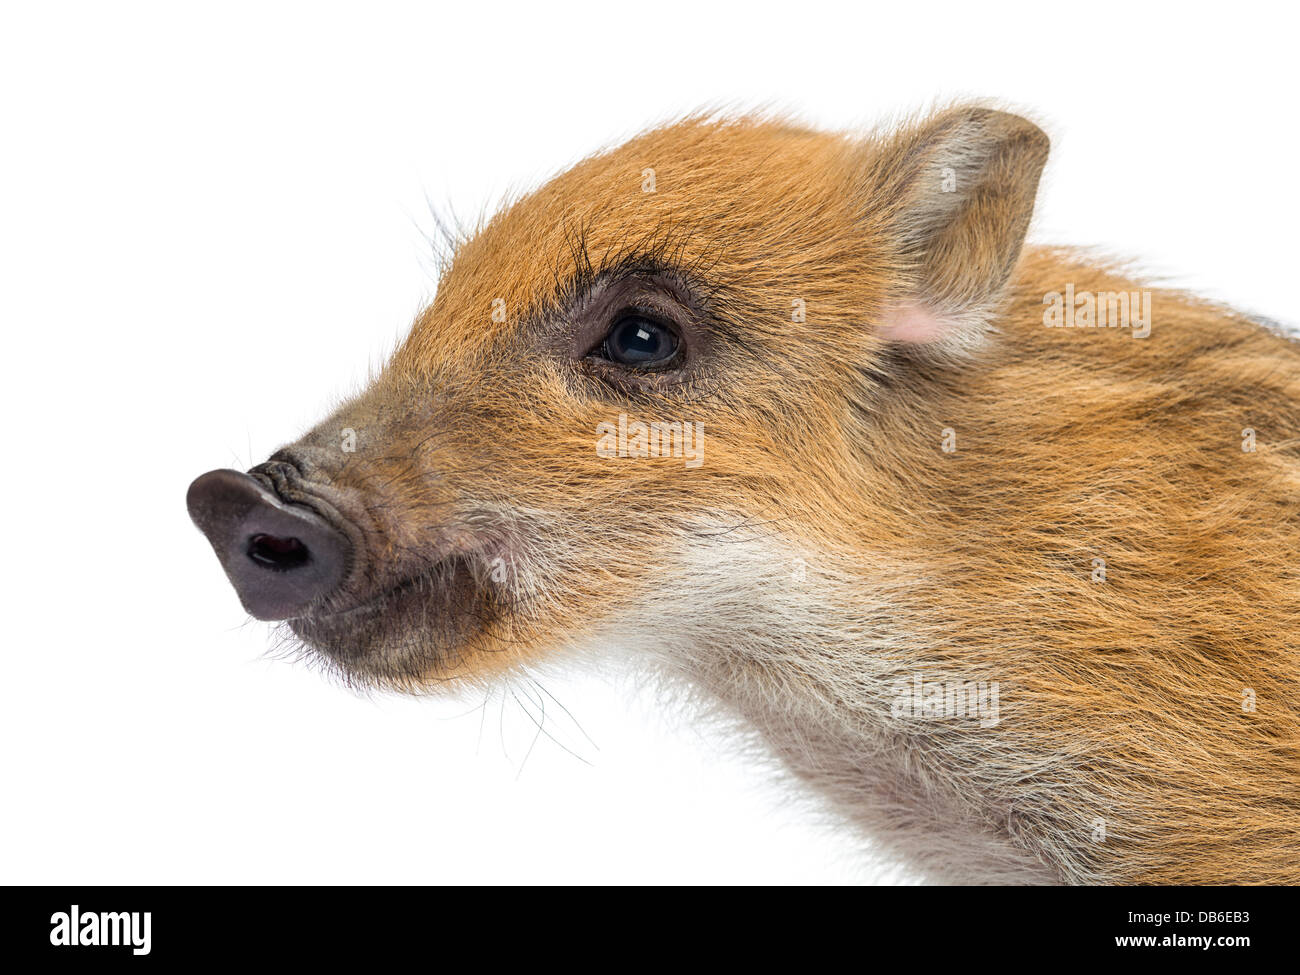 Wild boar, Sus scrofa, 2 months old, also known as wild pig looking away against white background Stock Photo